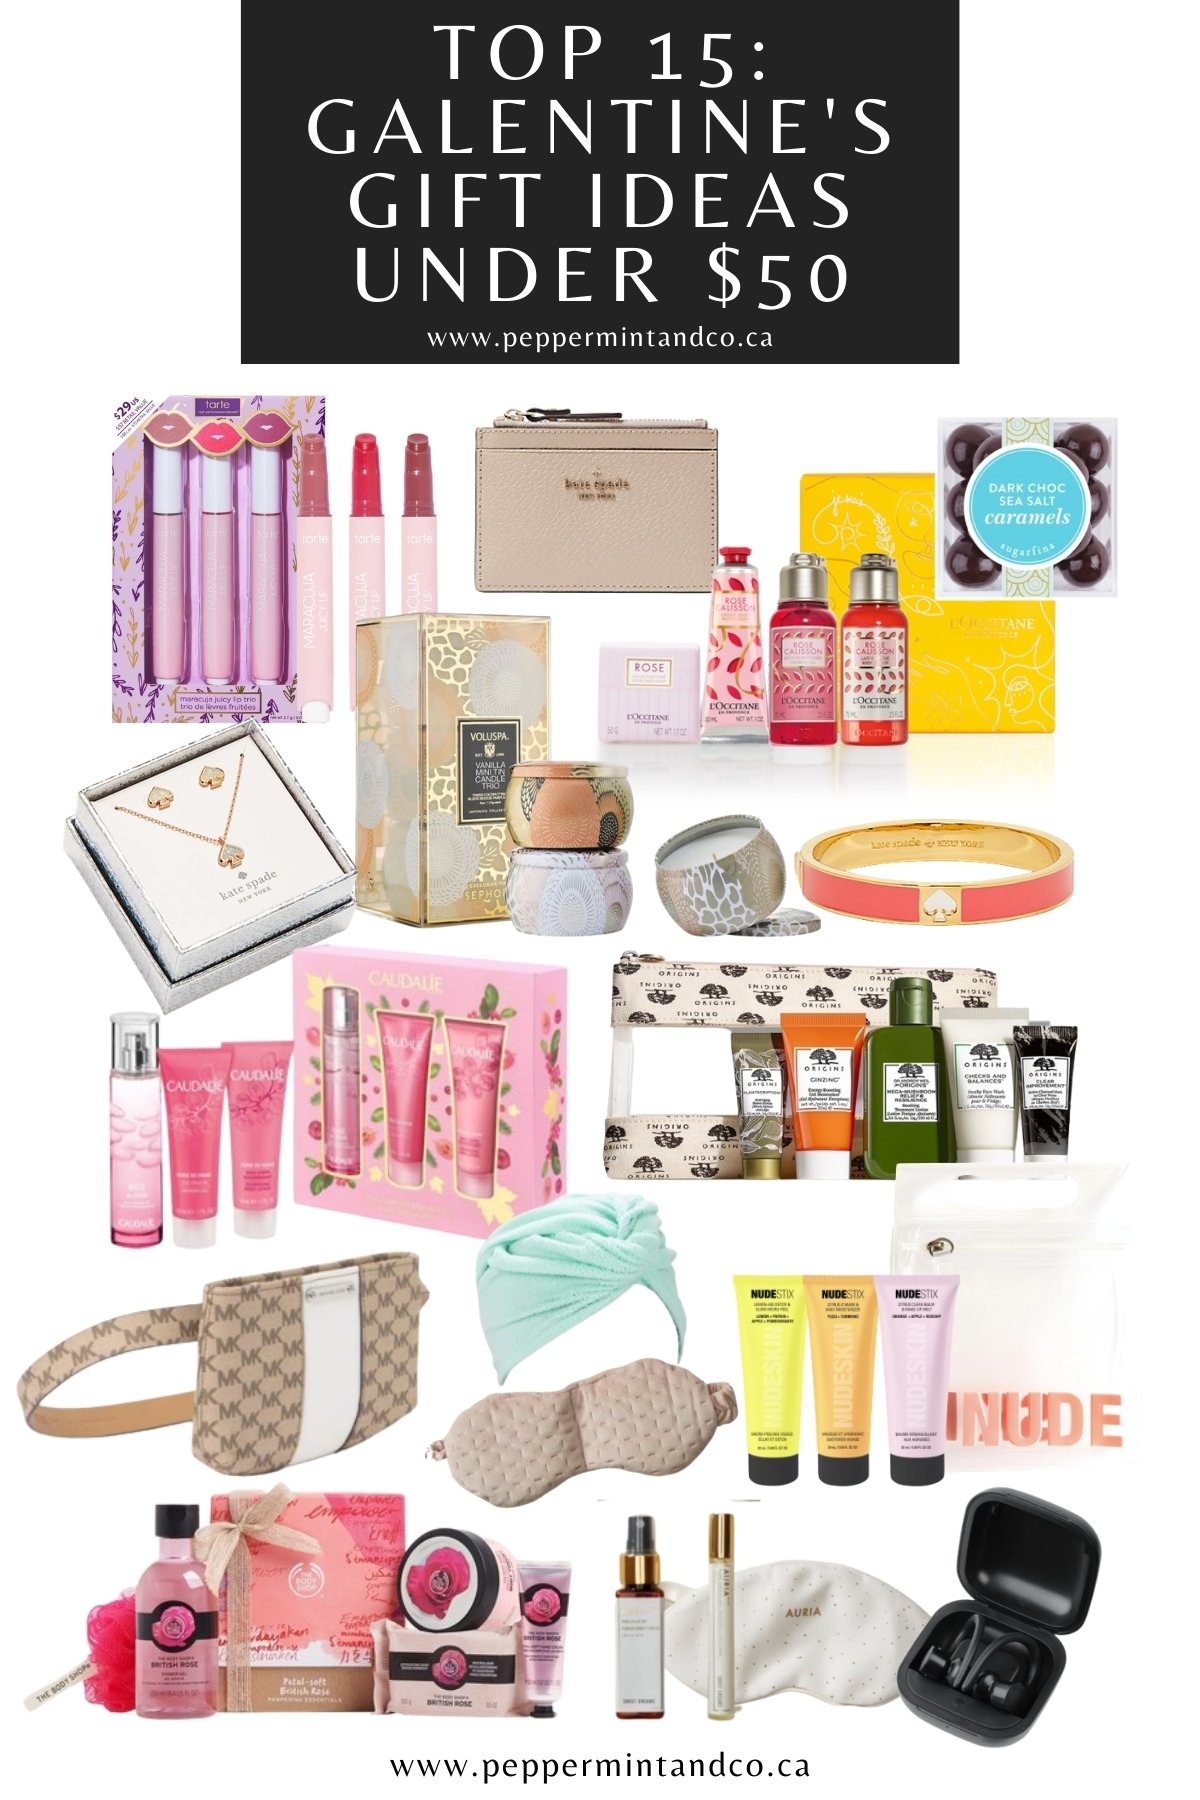 Galentine's Gift Guide